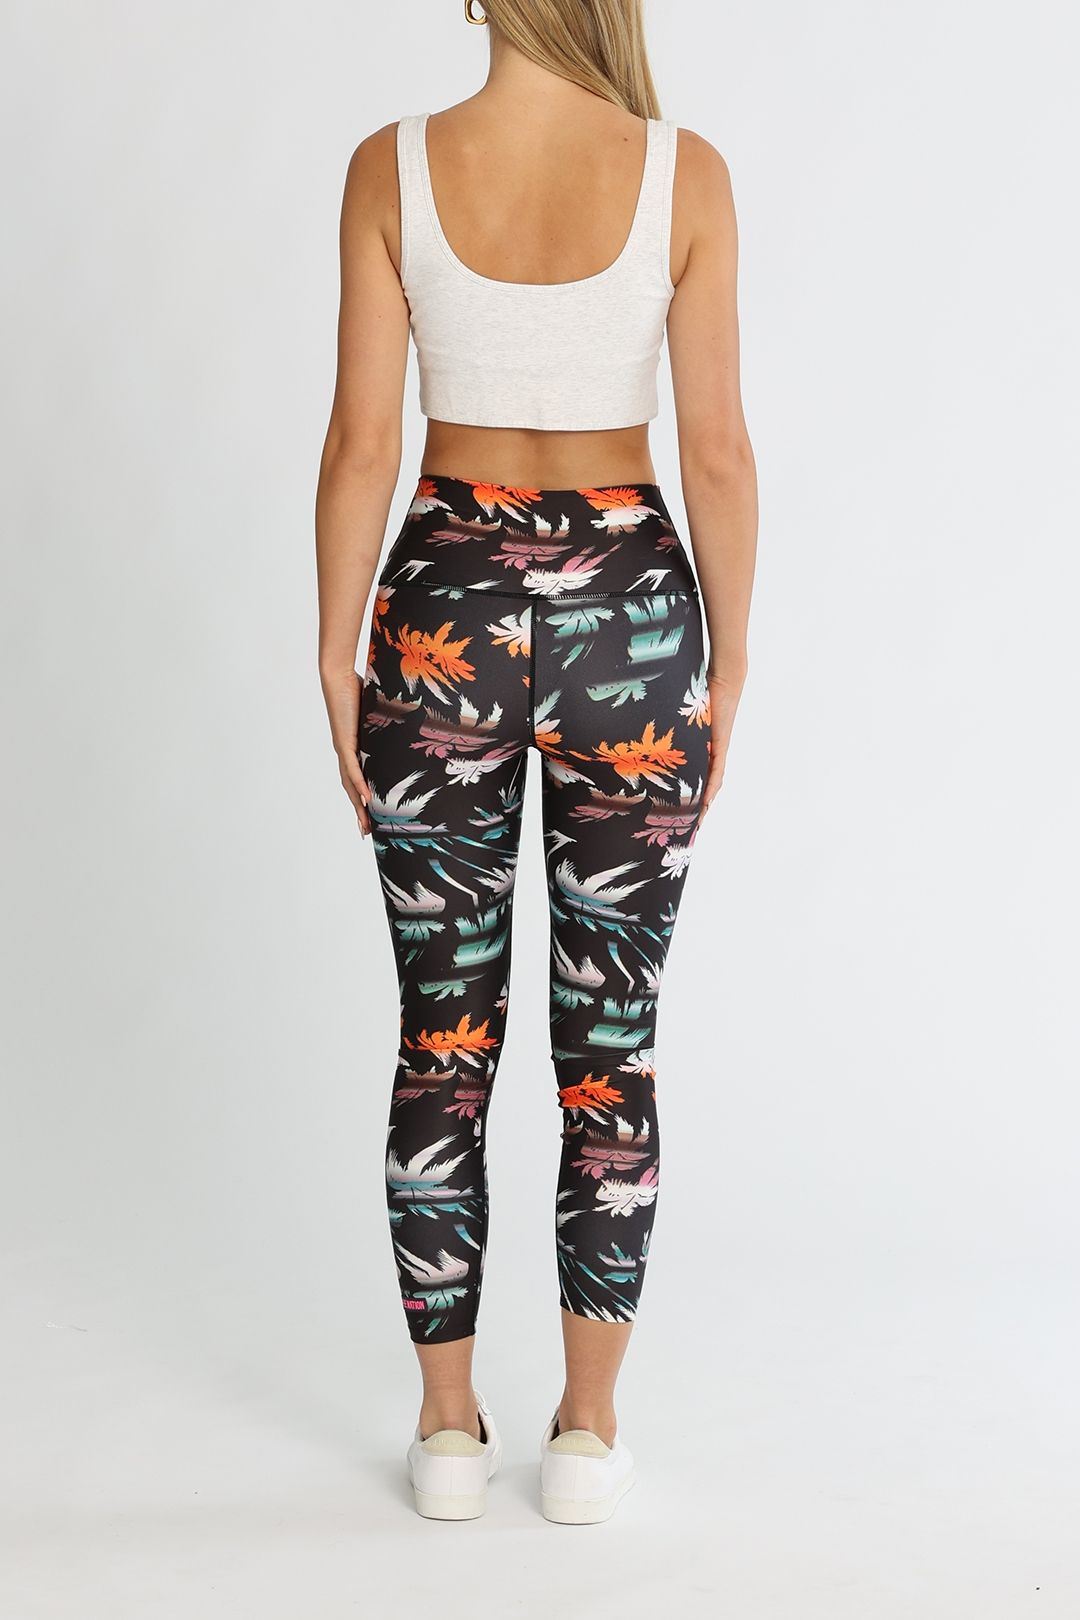 PE NATION Oasis Palm Tree Print Legging Fitted